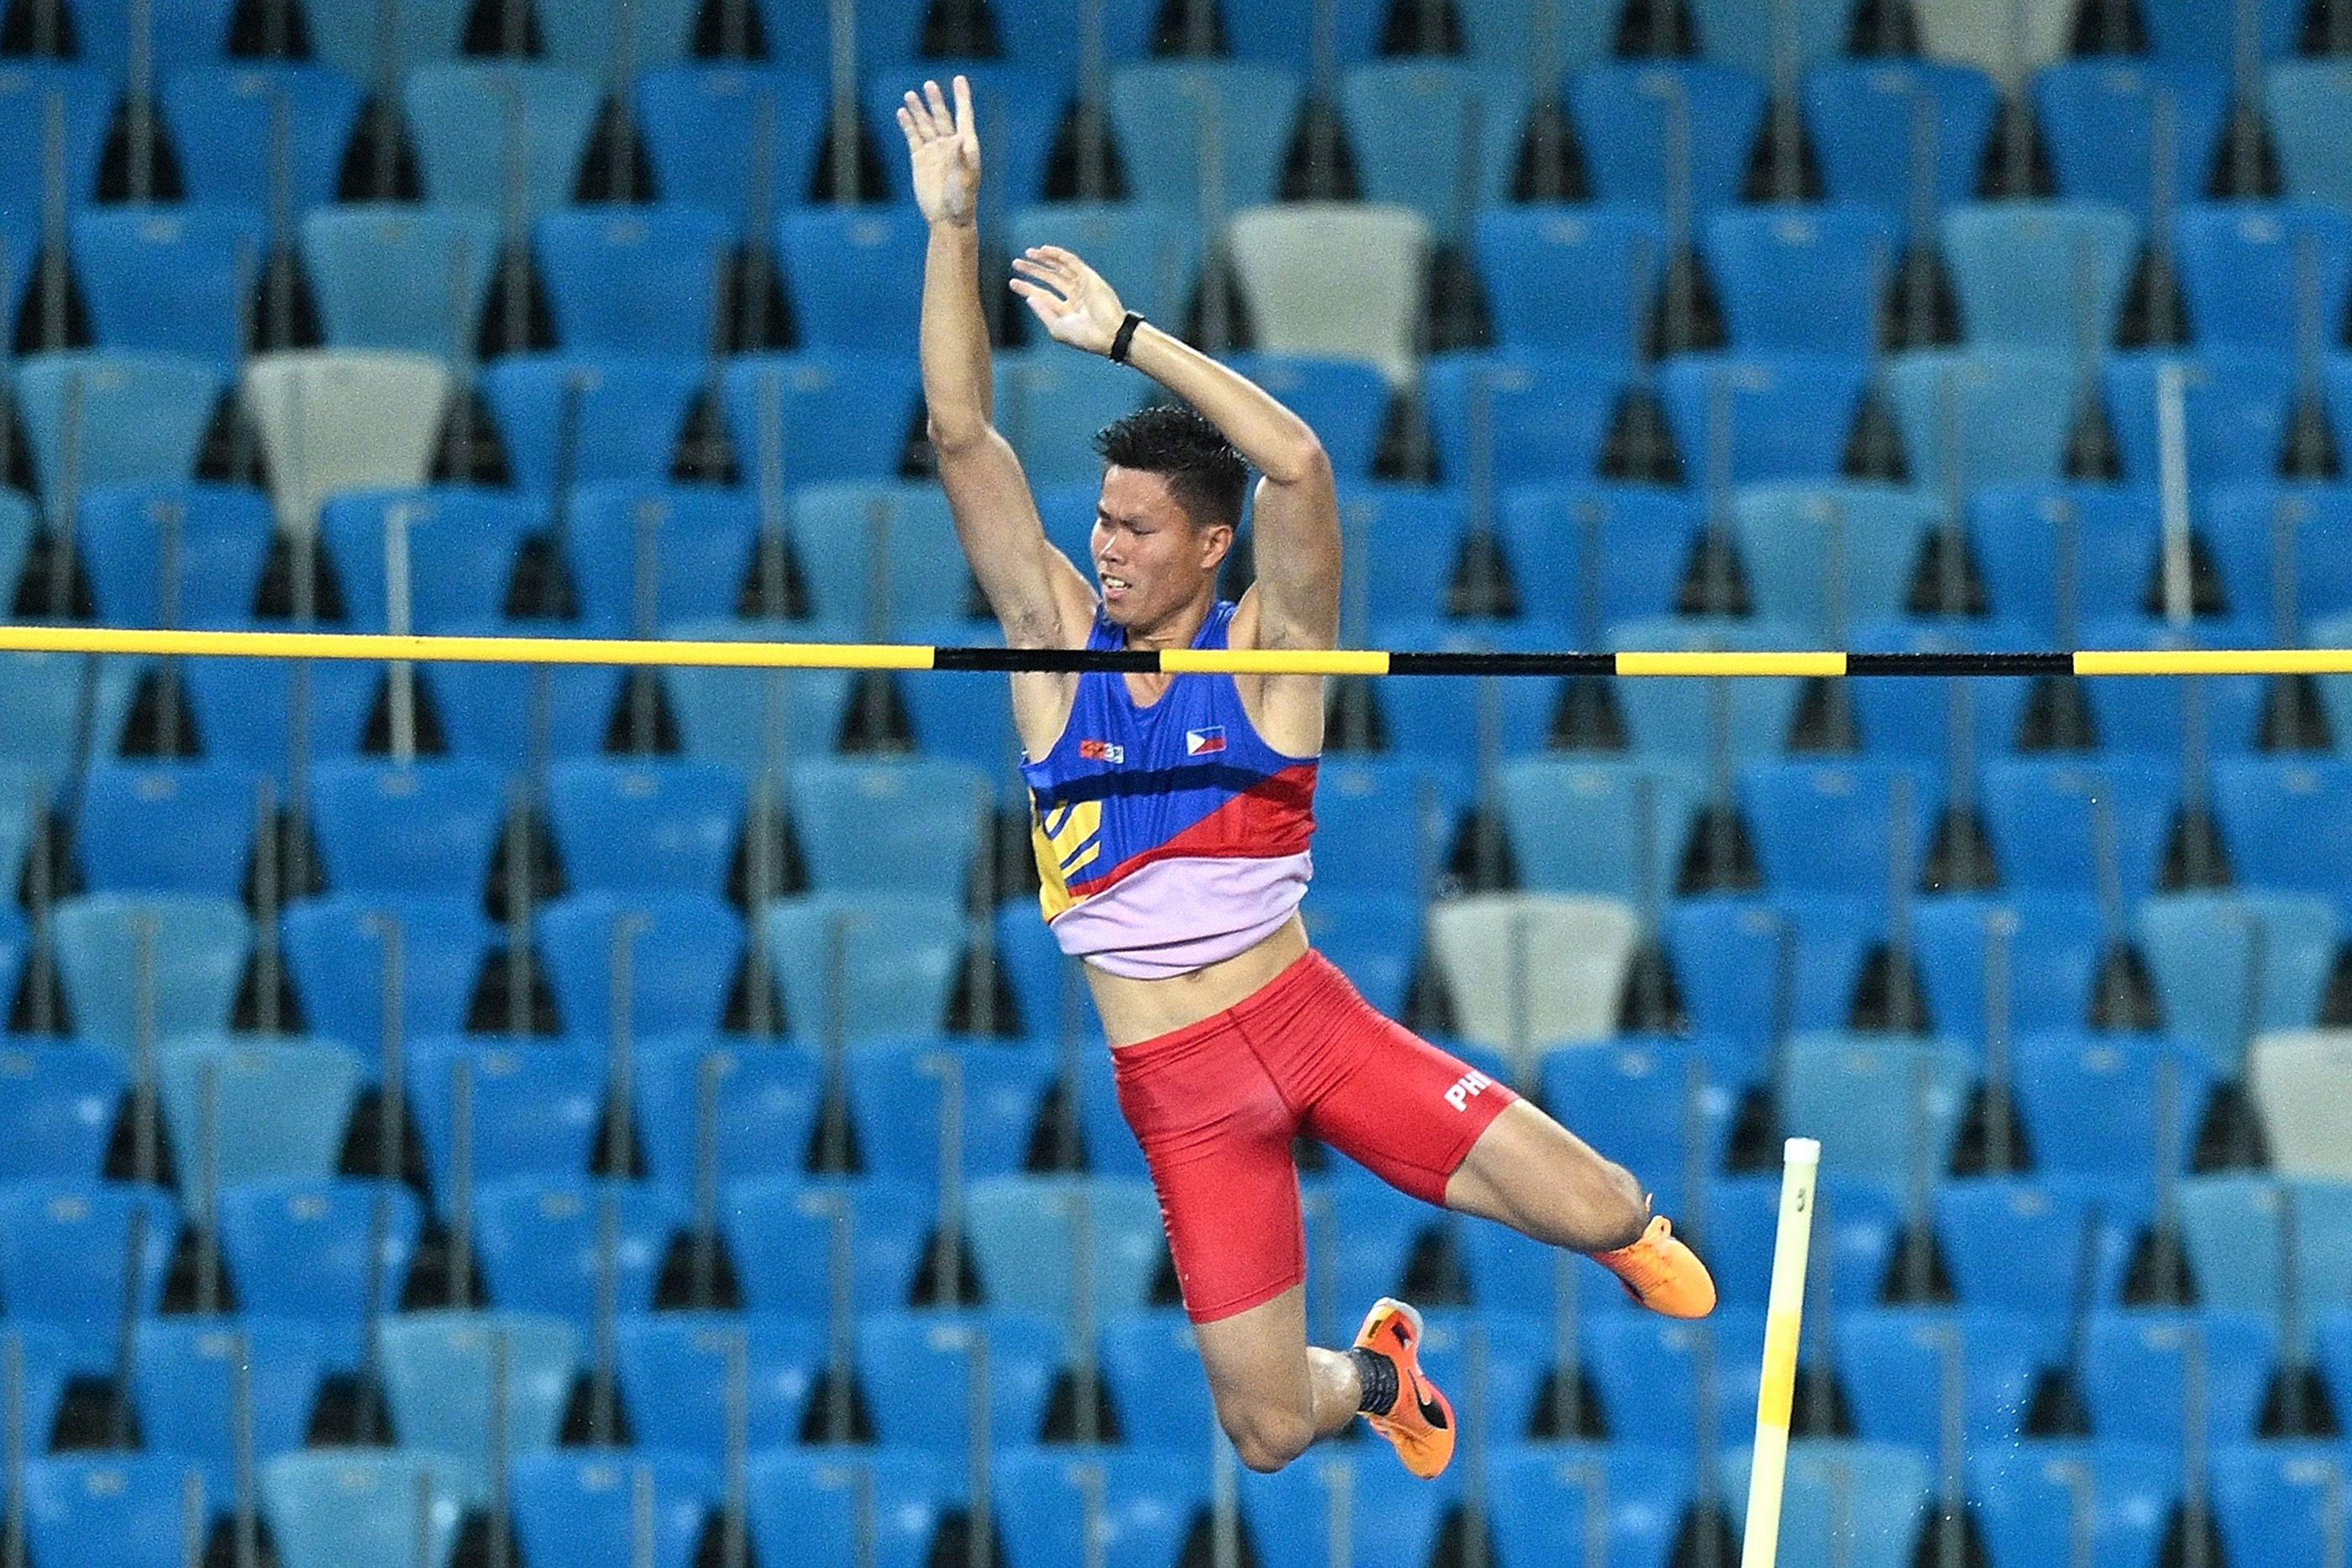 Ernest John Obiena competes at the Southeast Asian Games in Phnom Penh